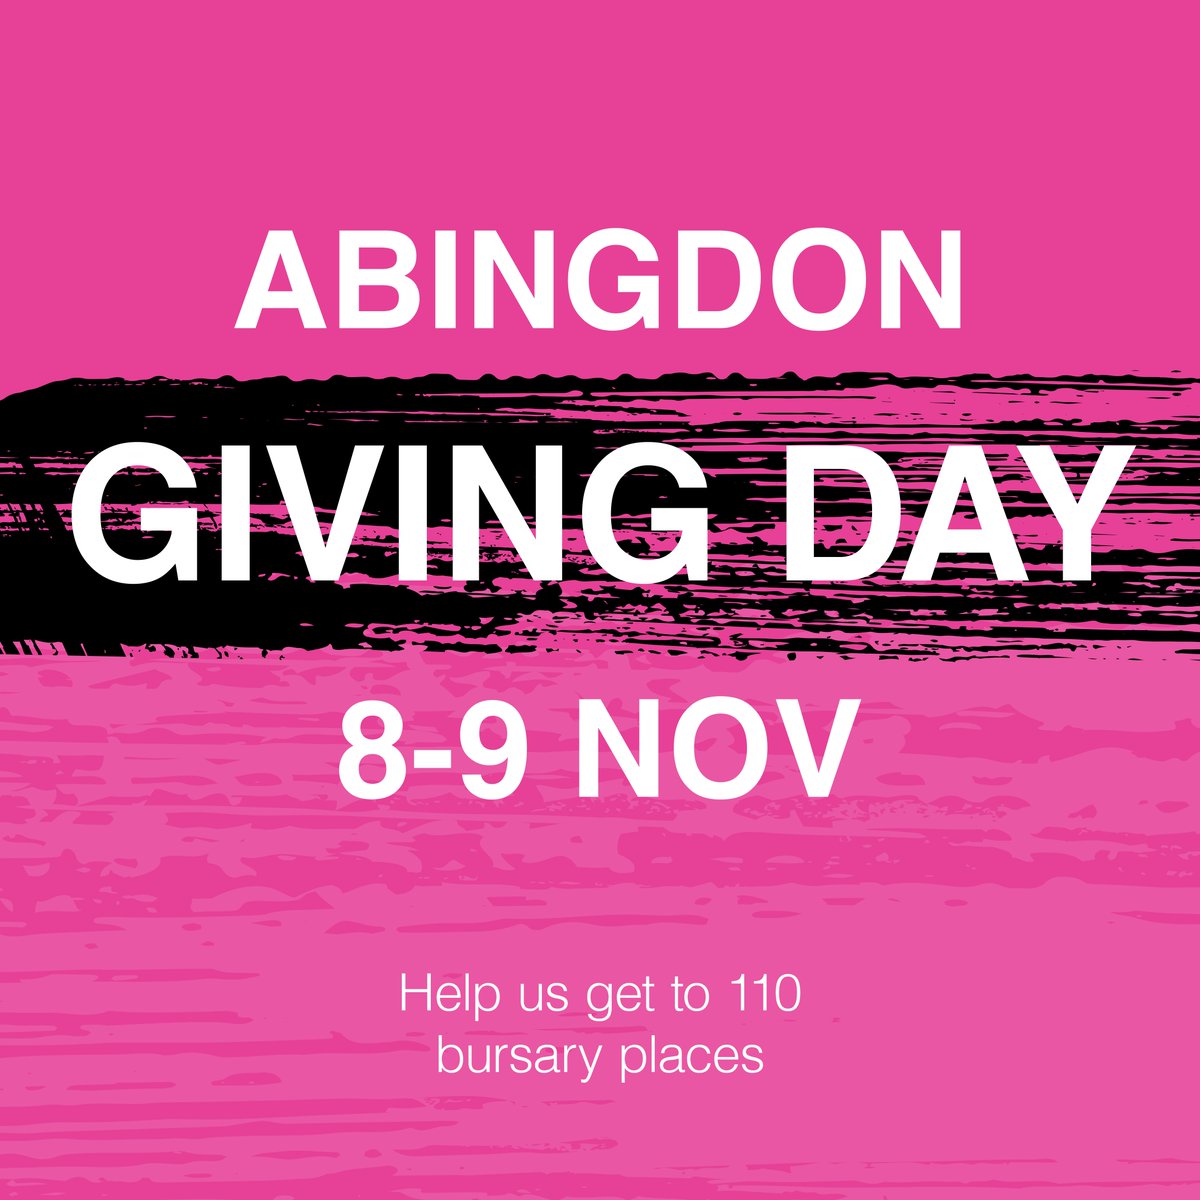 And we're off! Follow our tweets over the next 36 hours to keep up to date with Abingdon Giving Day 2023. #AbingdonTogether #AbingdonGivingDay2023 ow.ly/T9uW50Q5mFZ